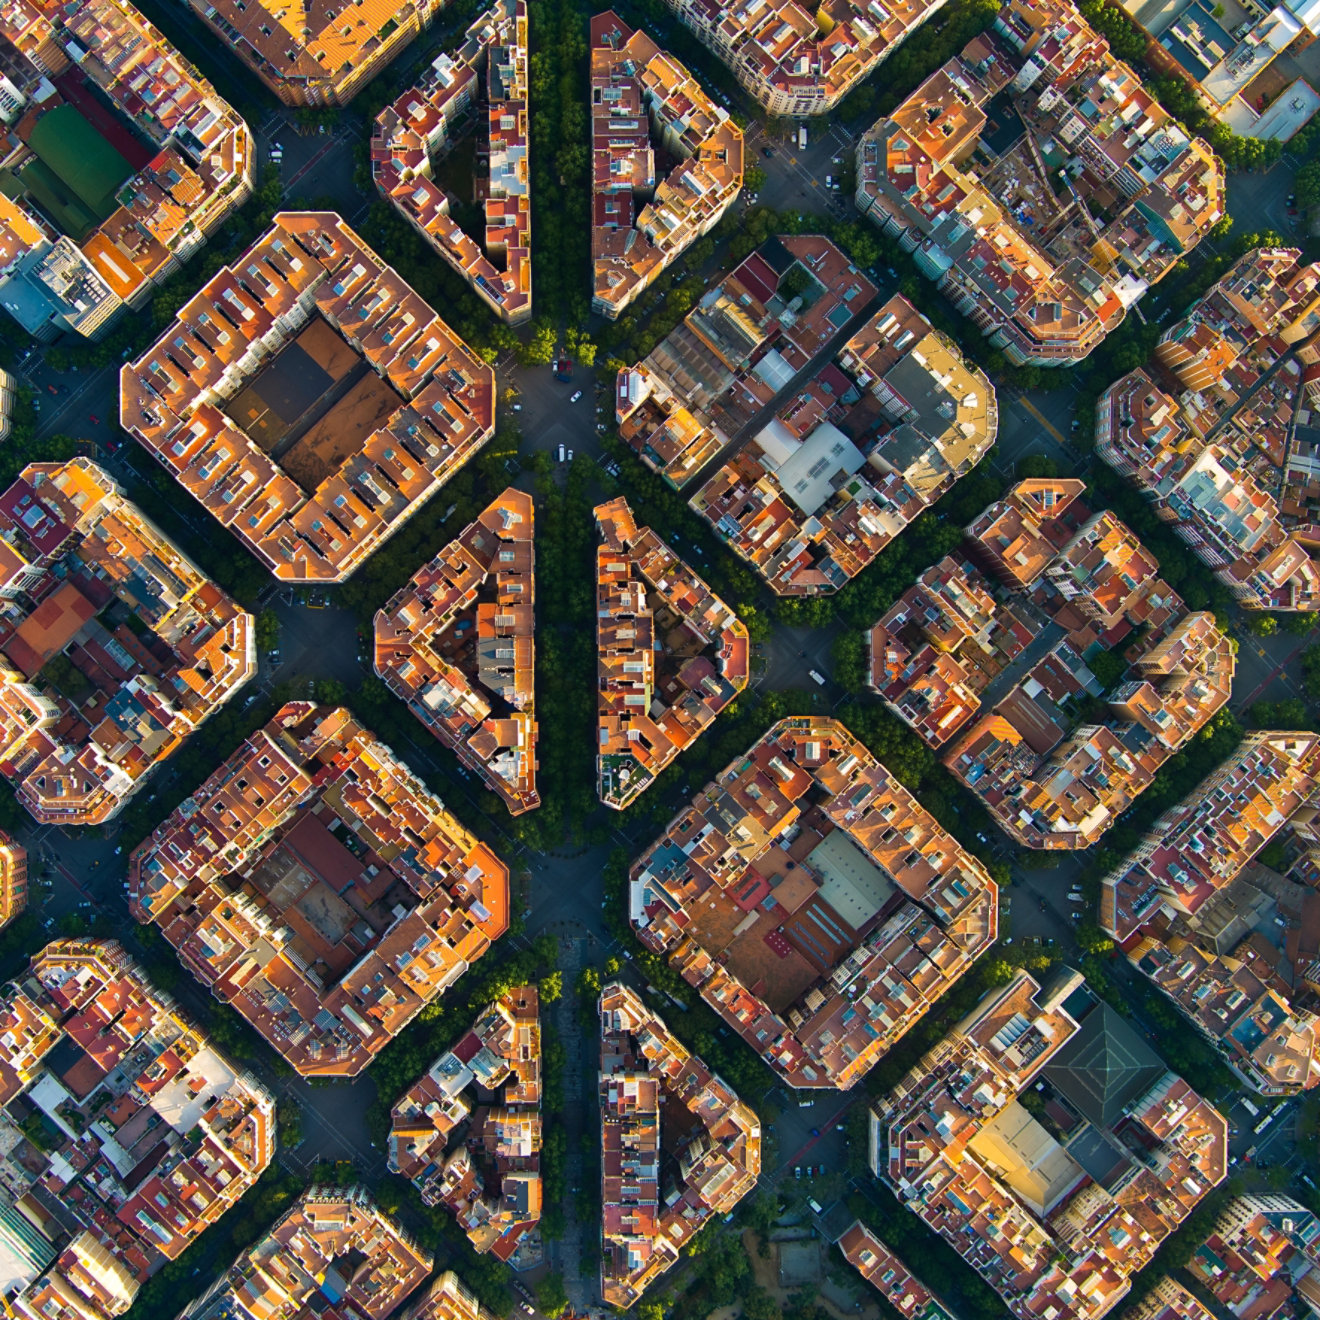 An aerial view of a residential area showing a diamond pattern of streets